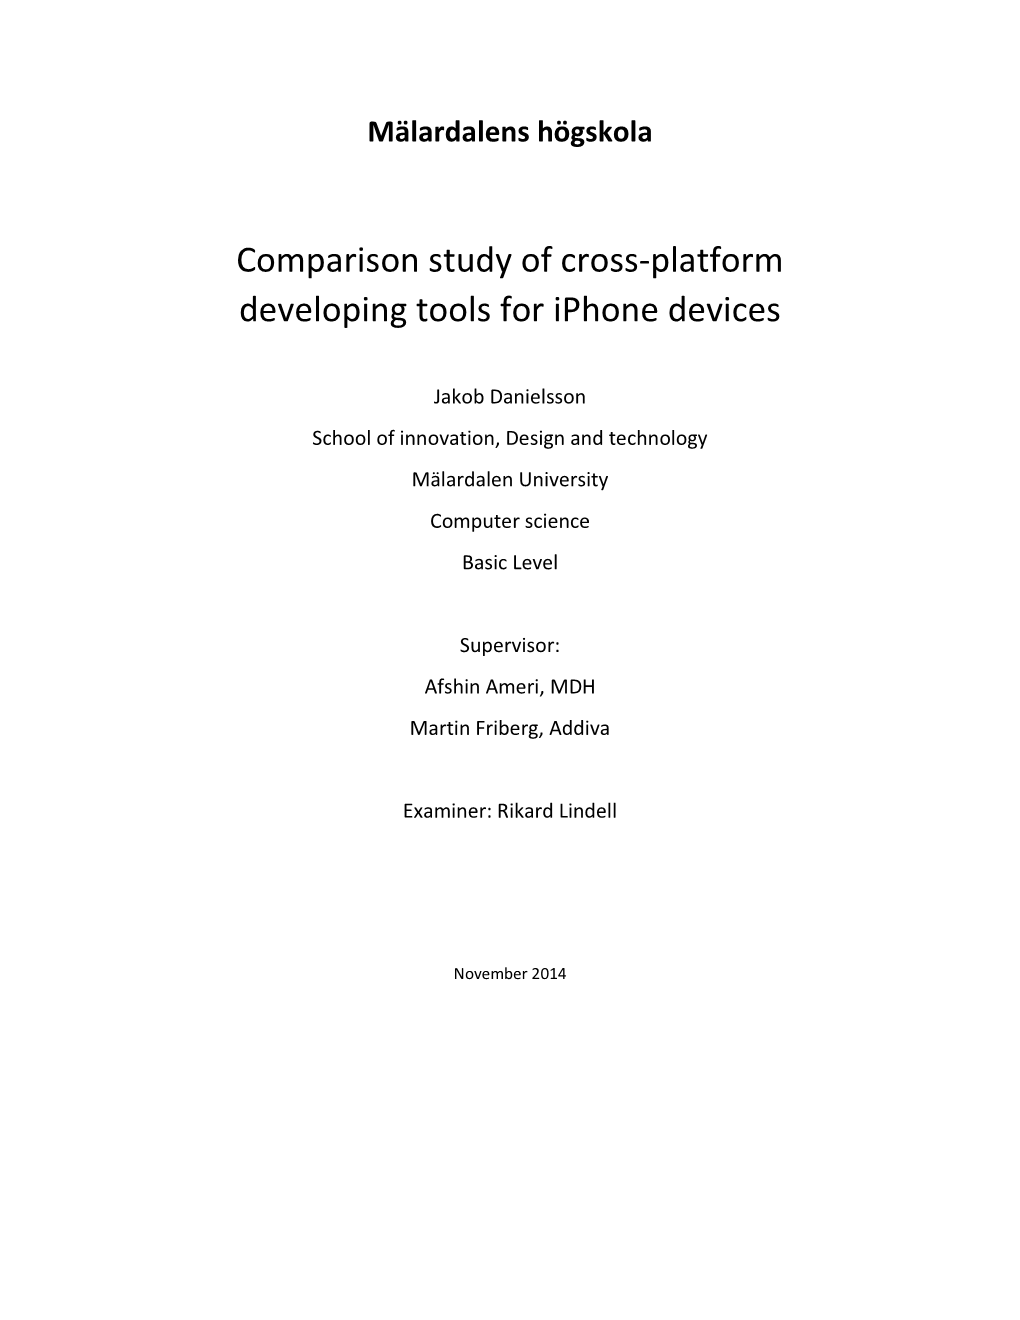 Comparison Study of Cross-Platform Developing Tools for Iphone Devices